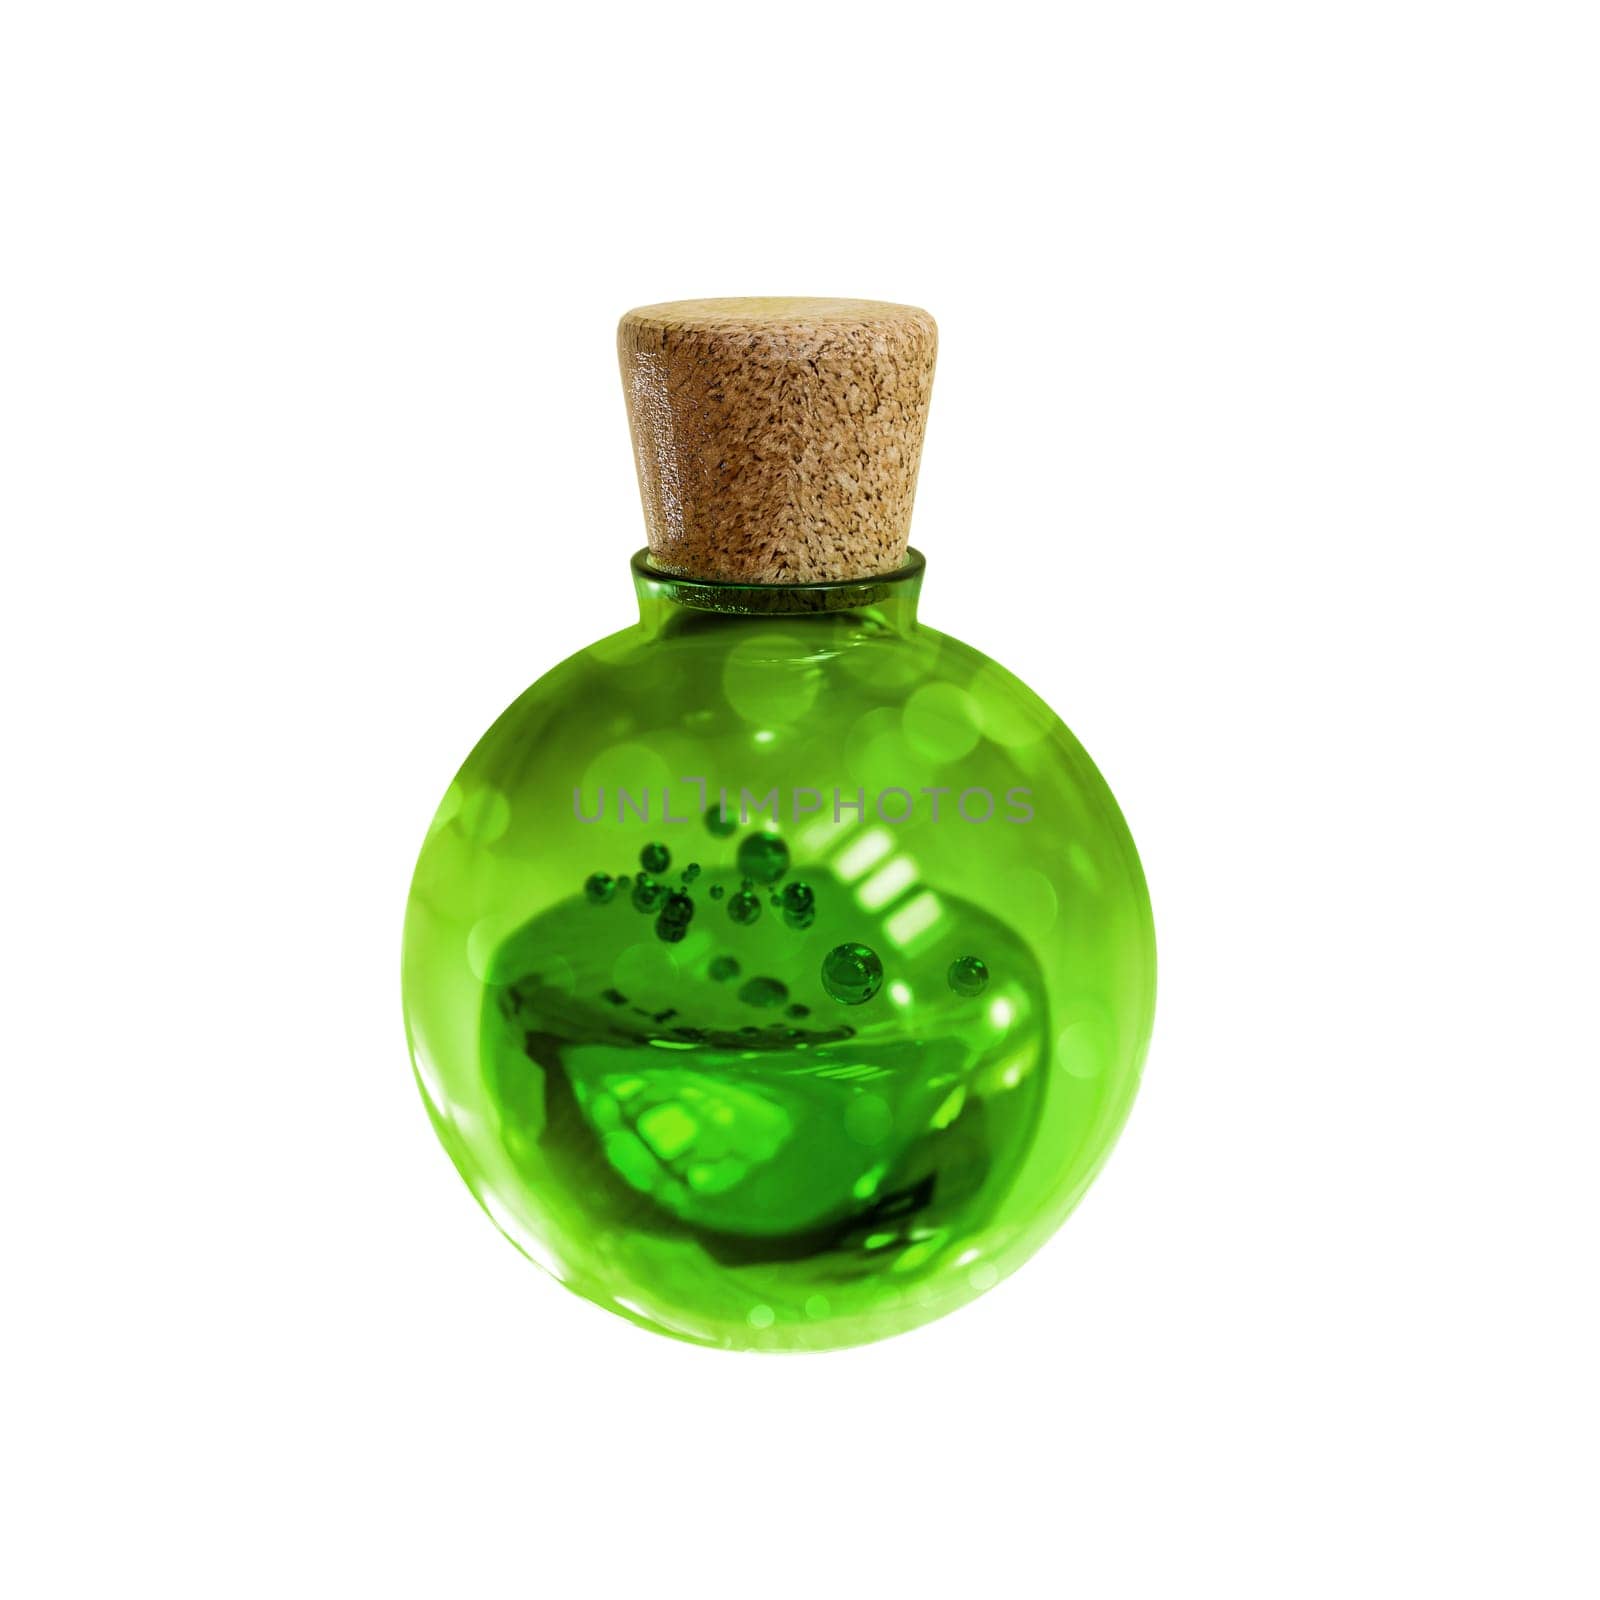 Bottle with green potion 3D rendering . by samunella